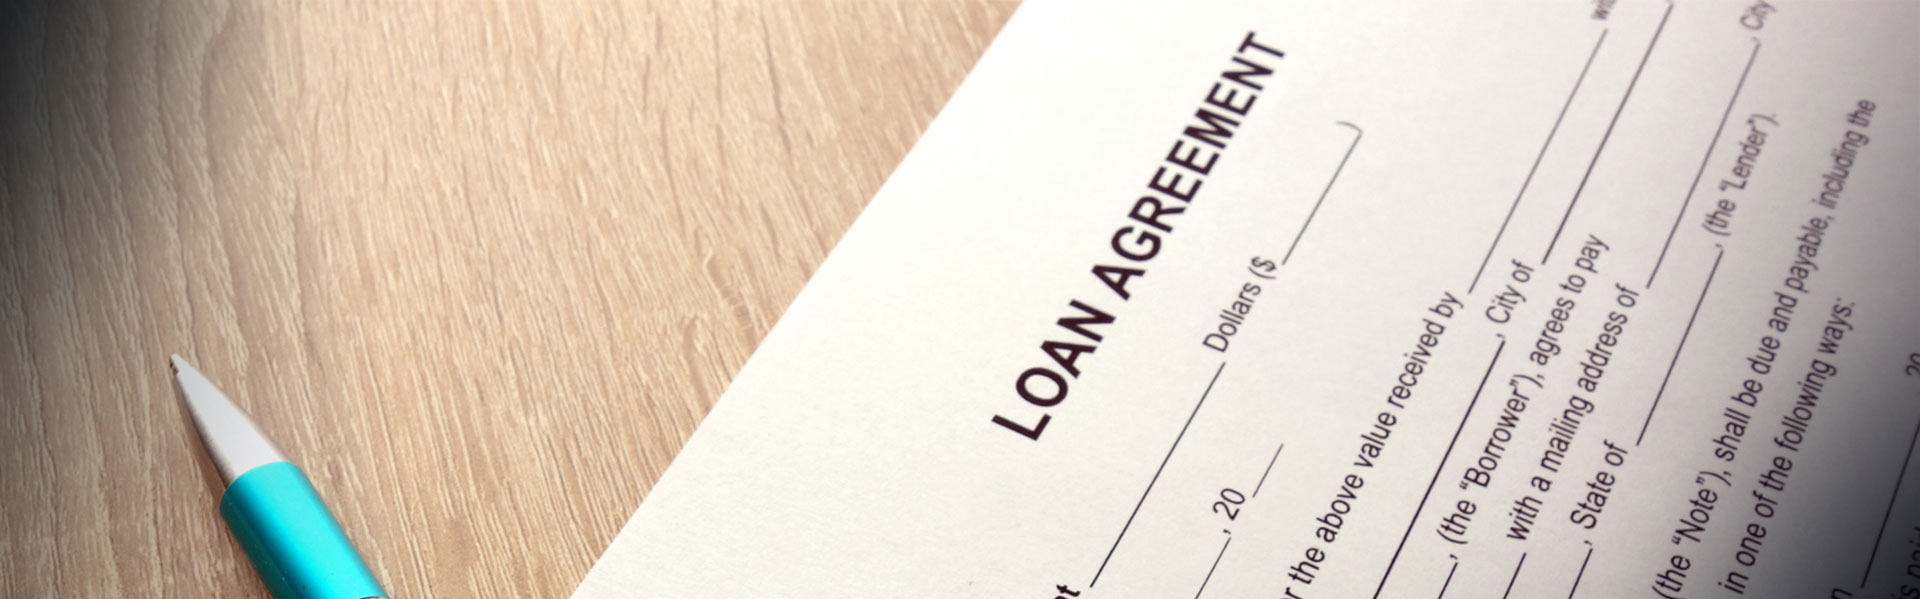 Personal Loans VS. Mortgage Agreements